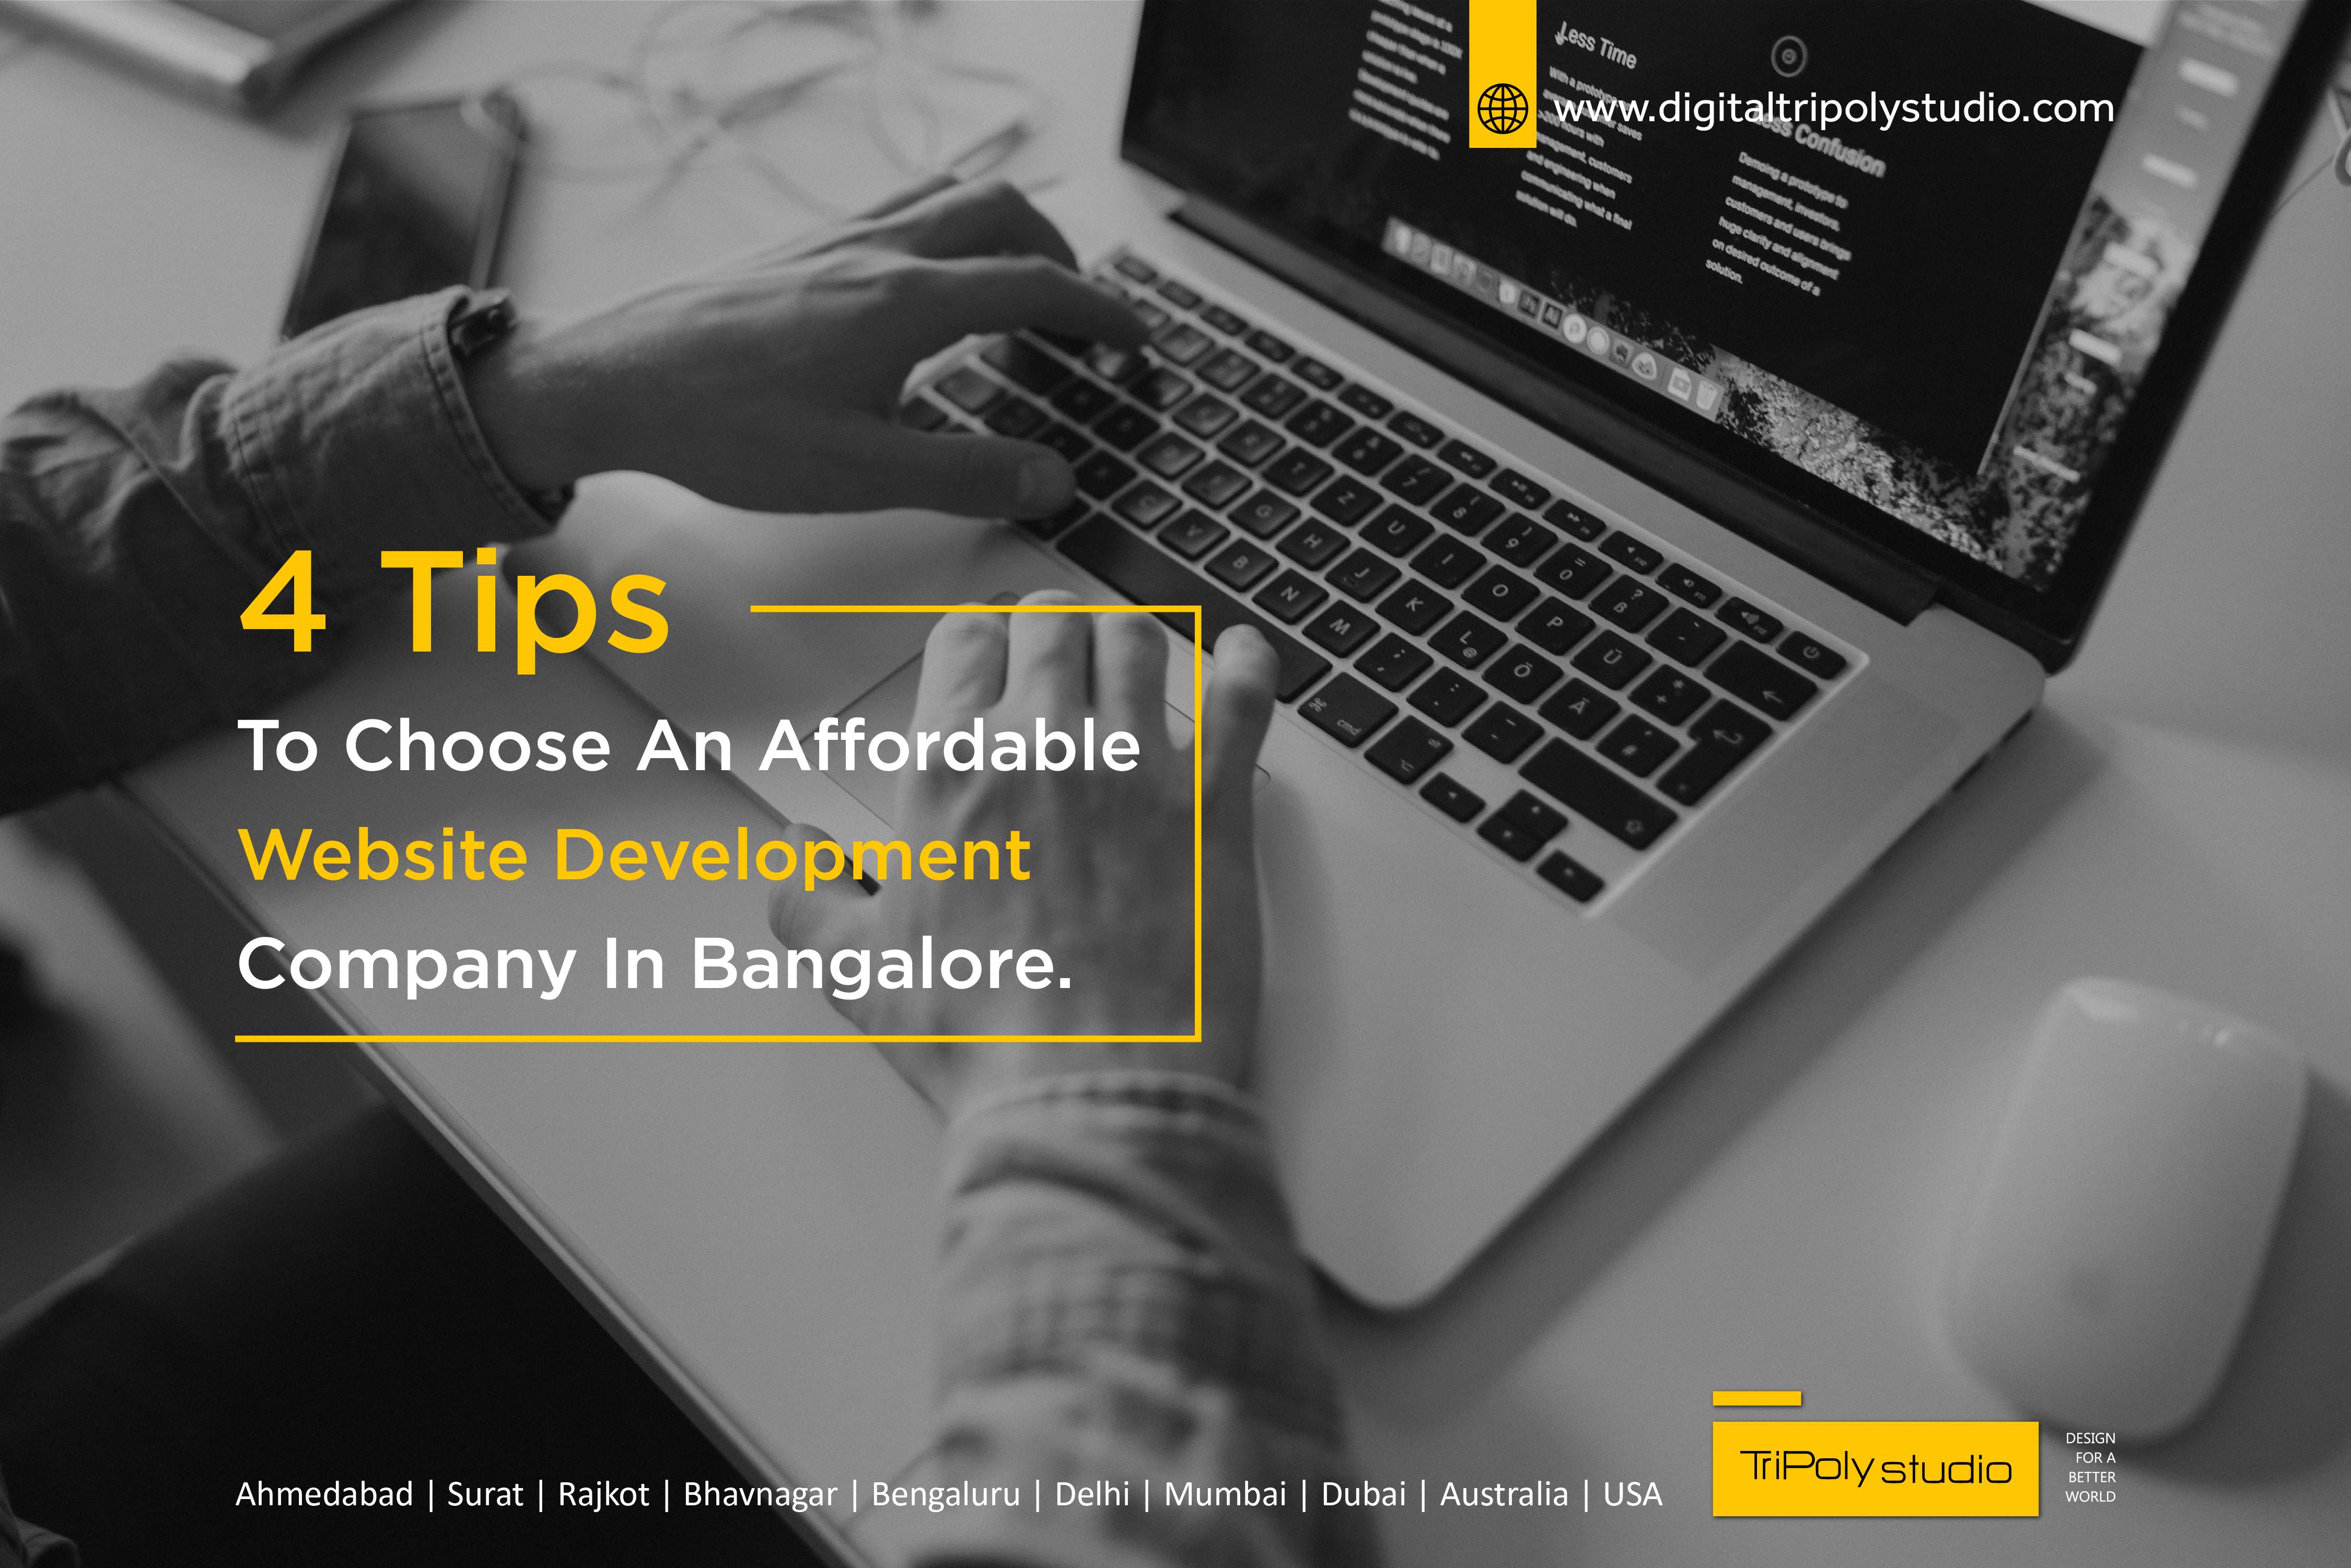 4 tips to choose an affordable website development company in bangalore